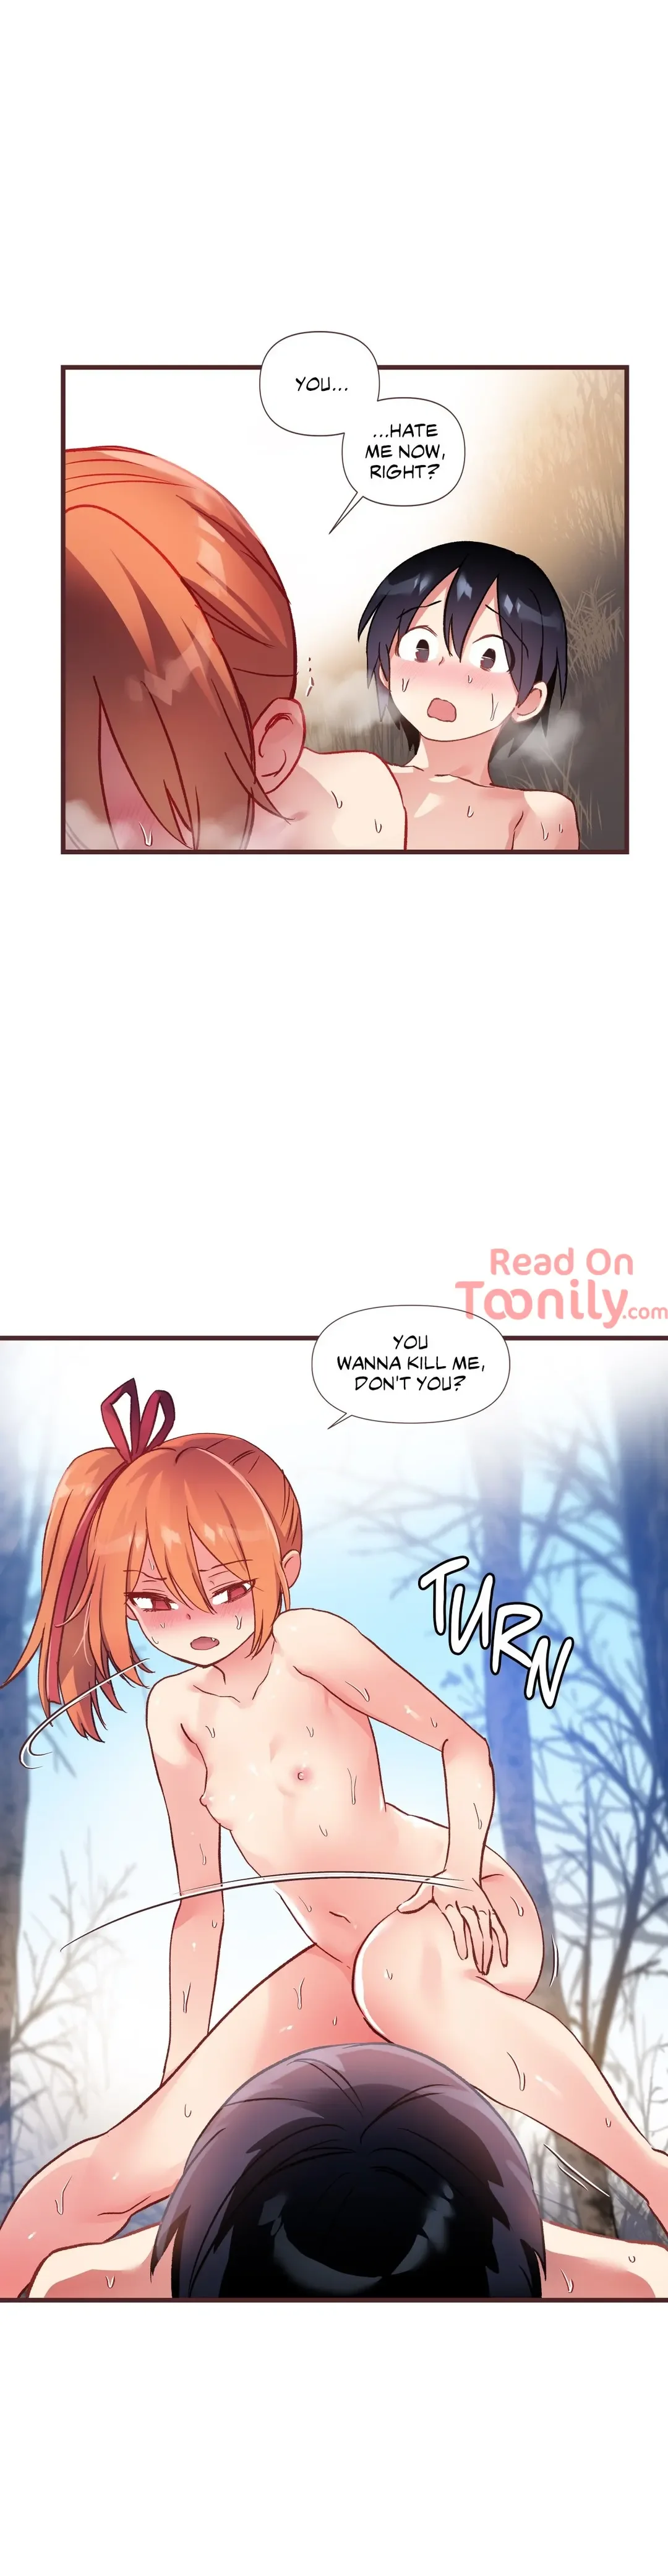 under-observation-my-first-loves-and-i-chap-46-40